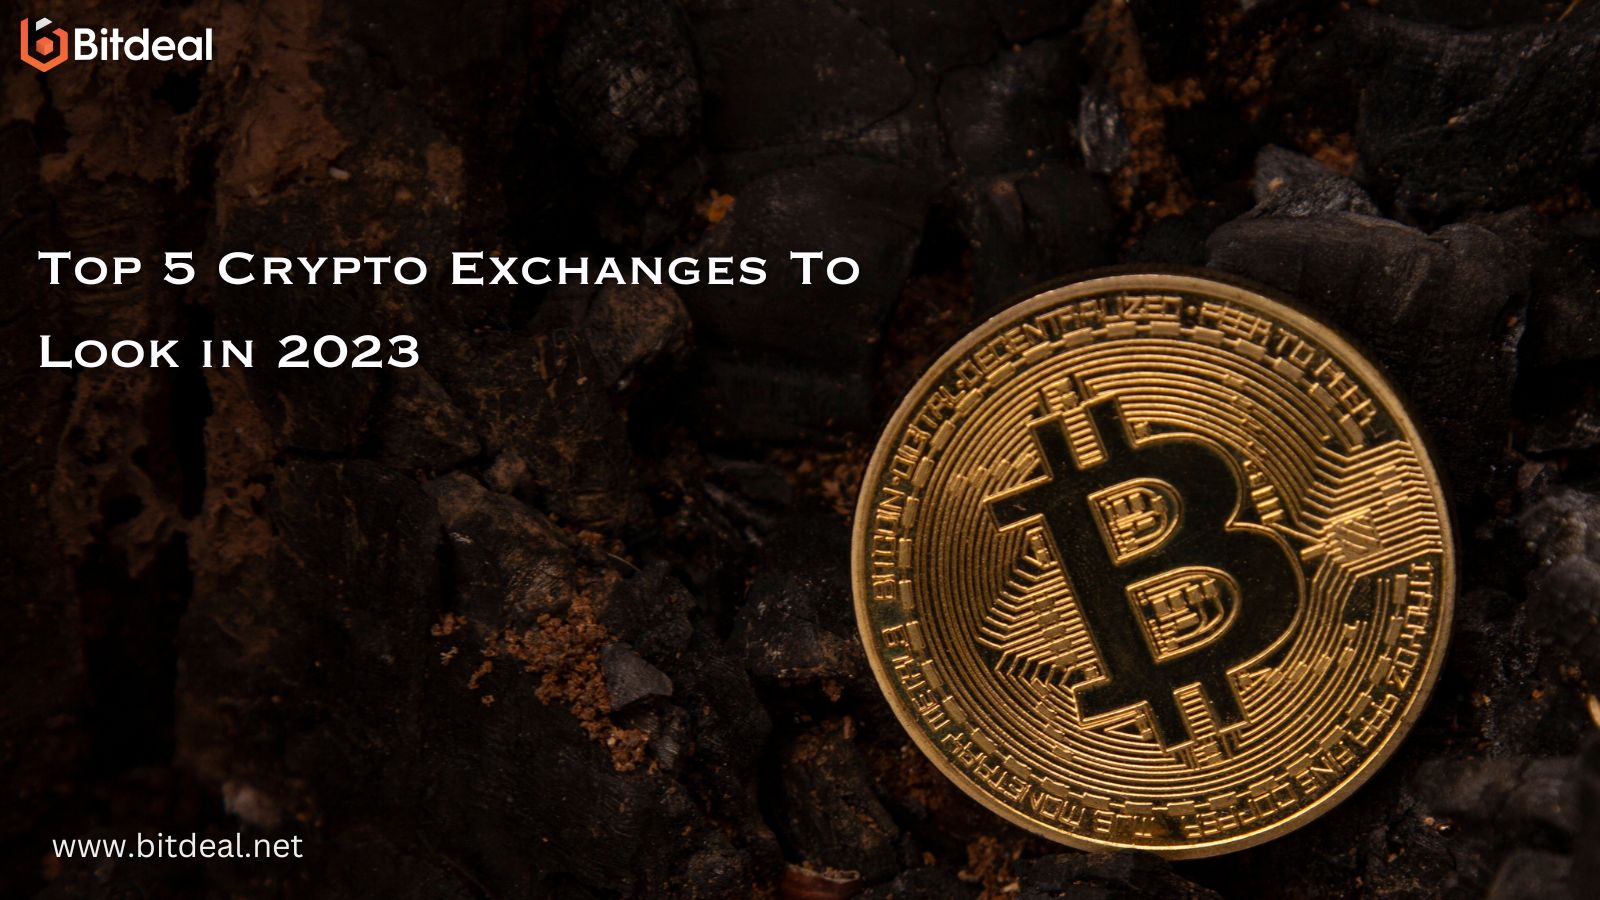 Top 5 Crypto Exchanges To Look in 2023